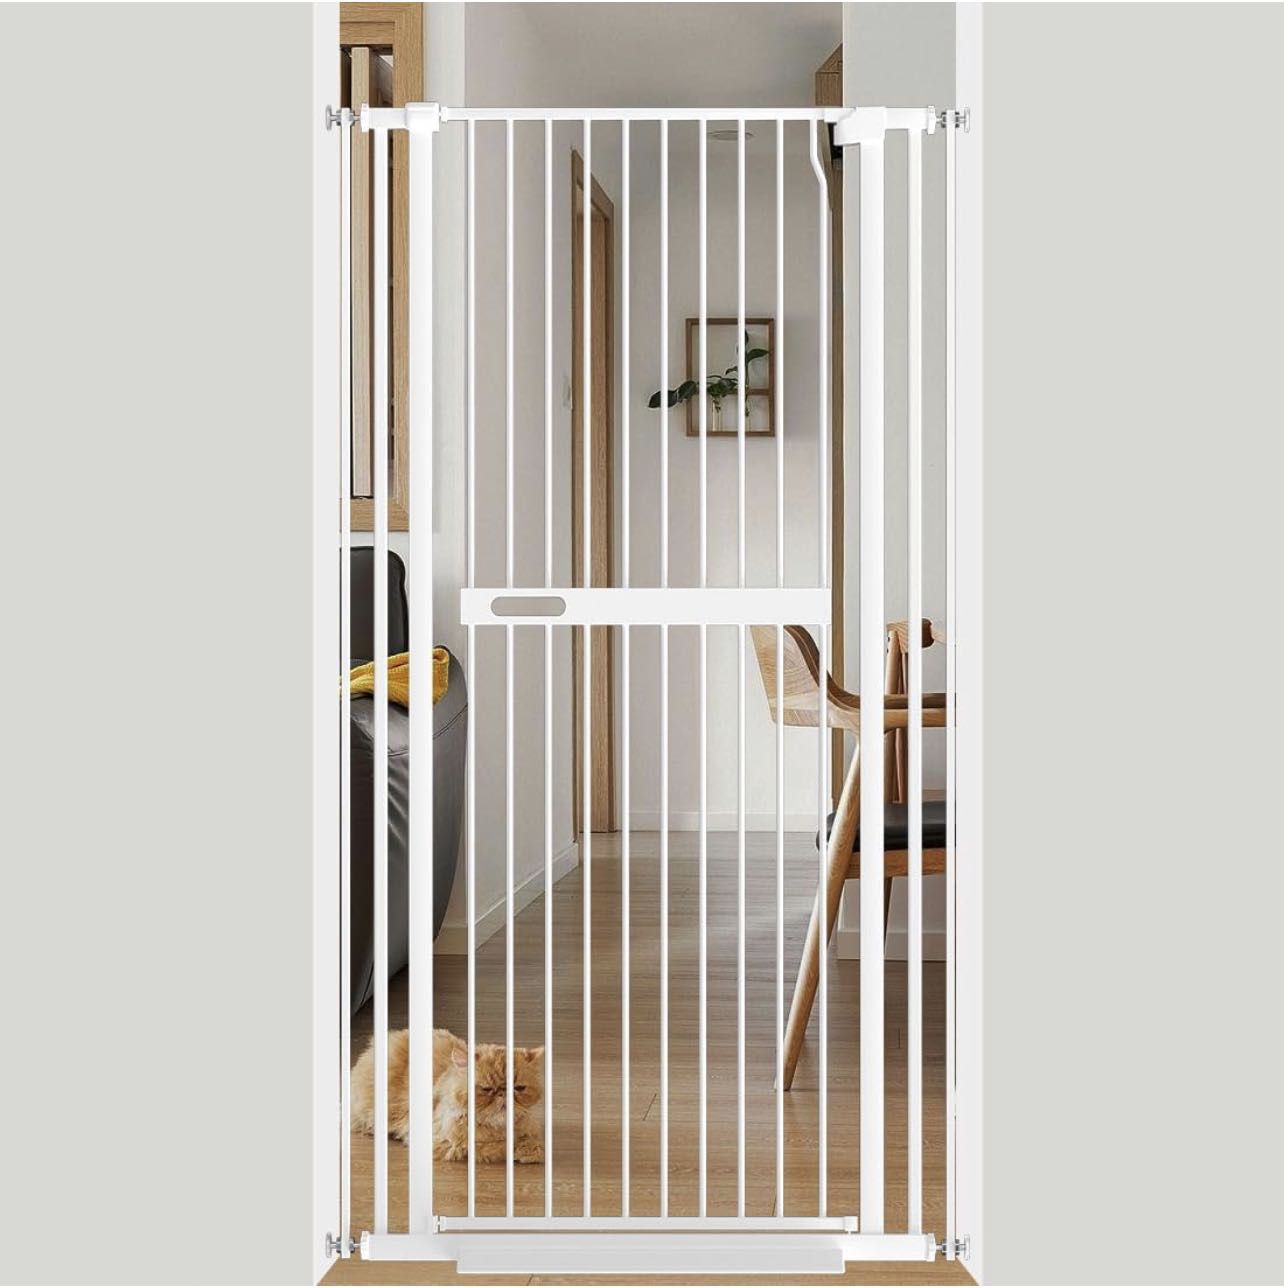 61.02" Extra Tall Cat Gate Wide Pressure Mounted Tall Gate Metal Black Dog Pet Cat Tall Gates for Doorways